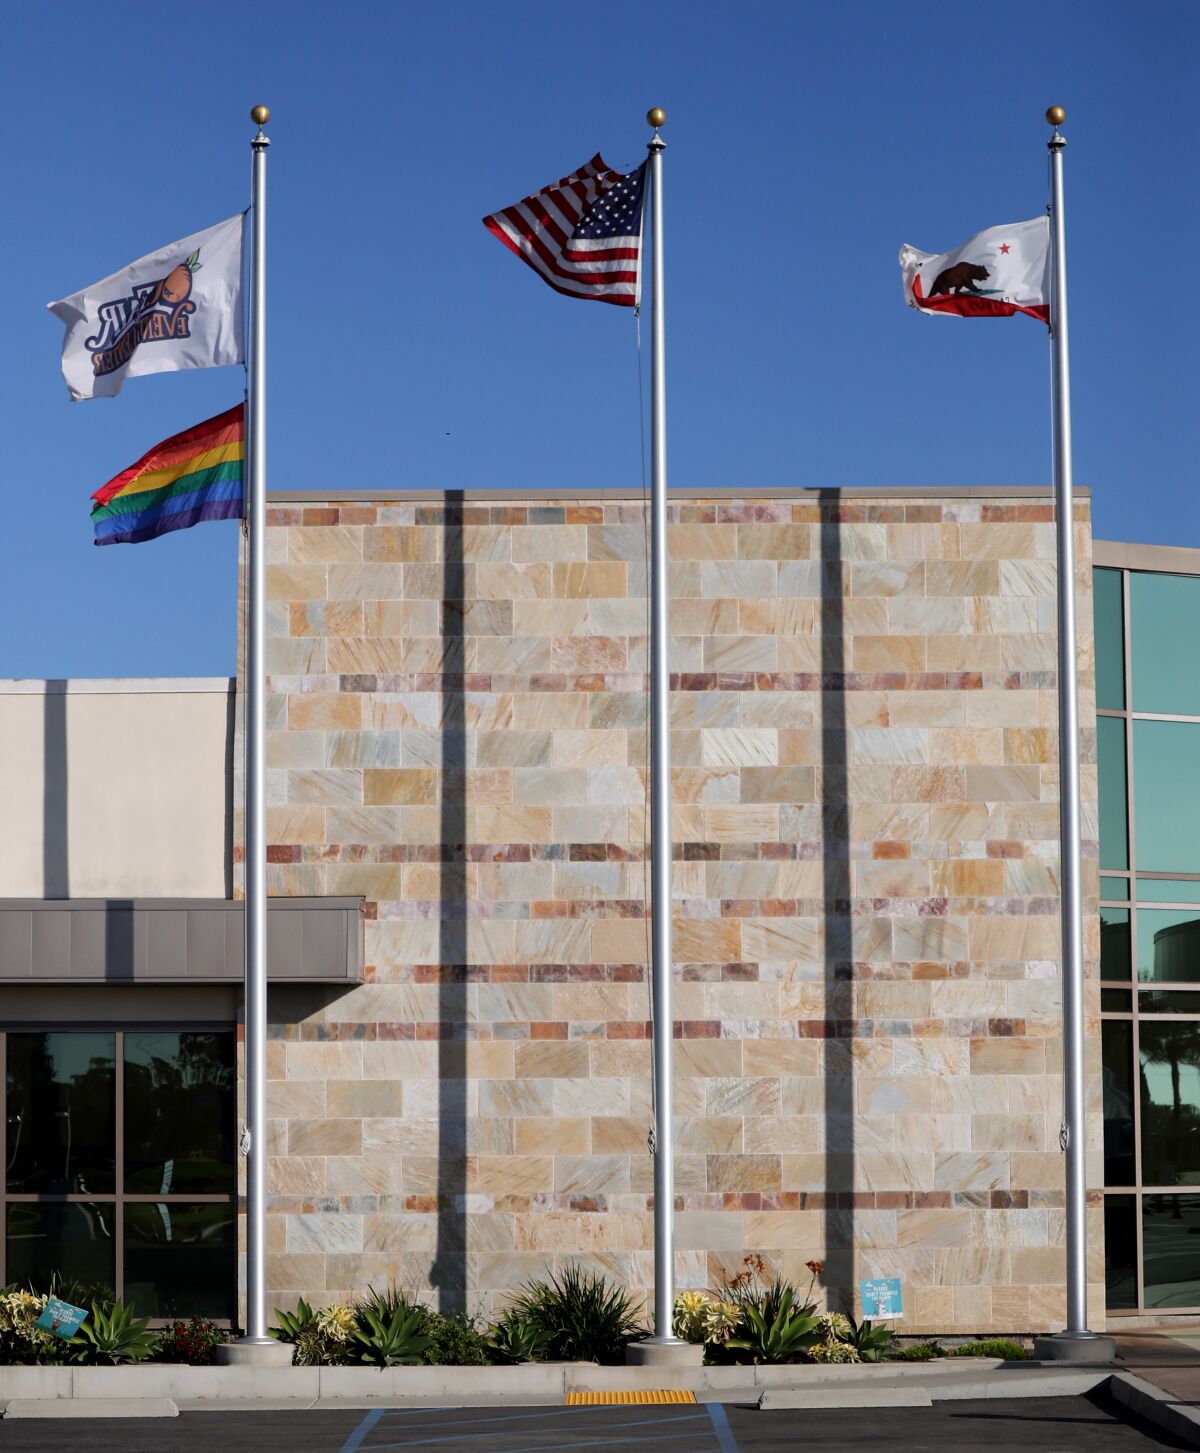 The OC Fair, LGBTQ, U.S. and California flags fly outside of the OC Fair & Event Center administration building.